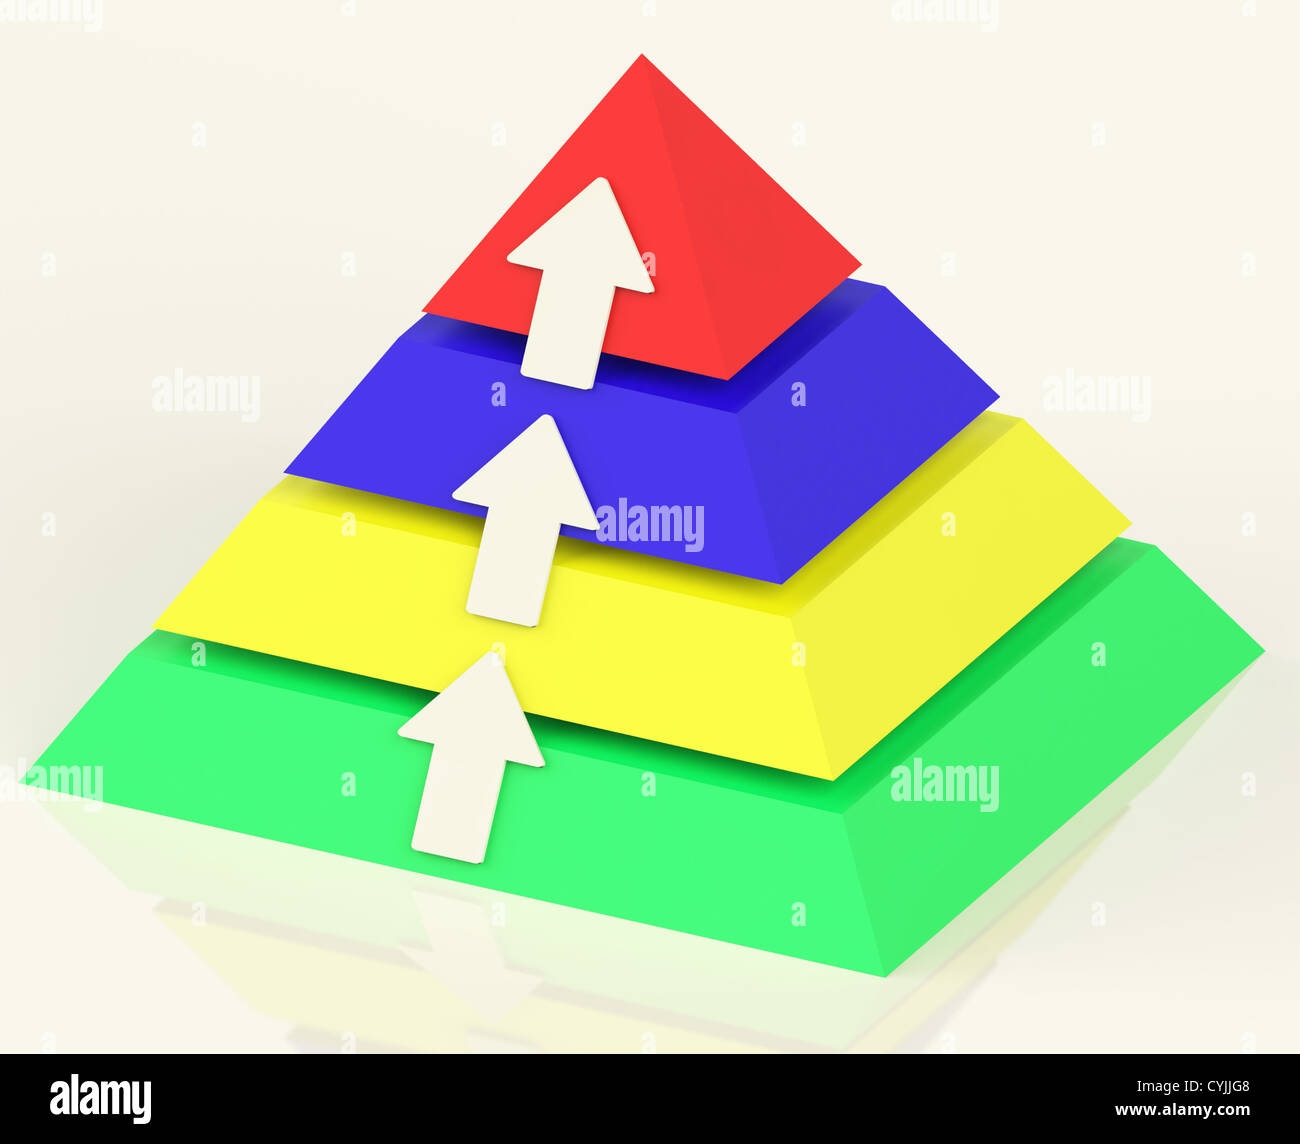 Pyramid With Up Arrows Showing Growth Or Progression Stock Photo